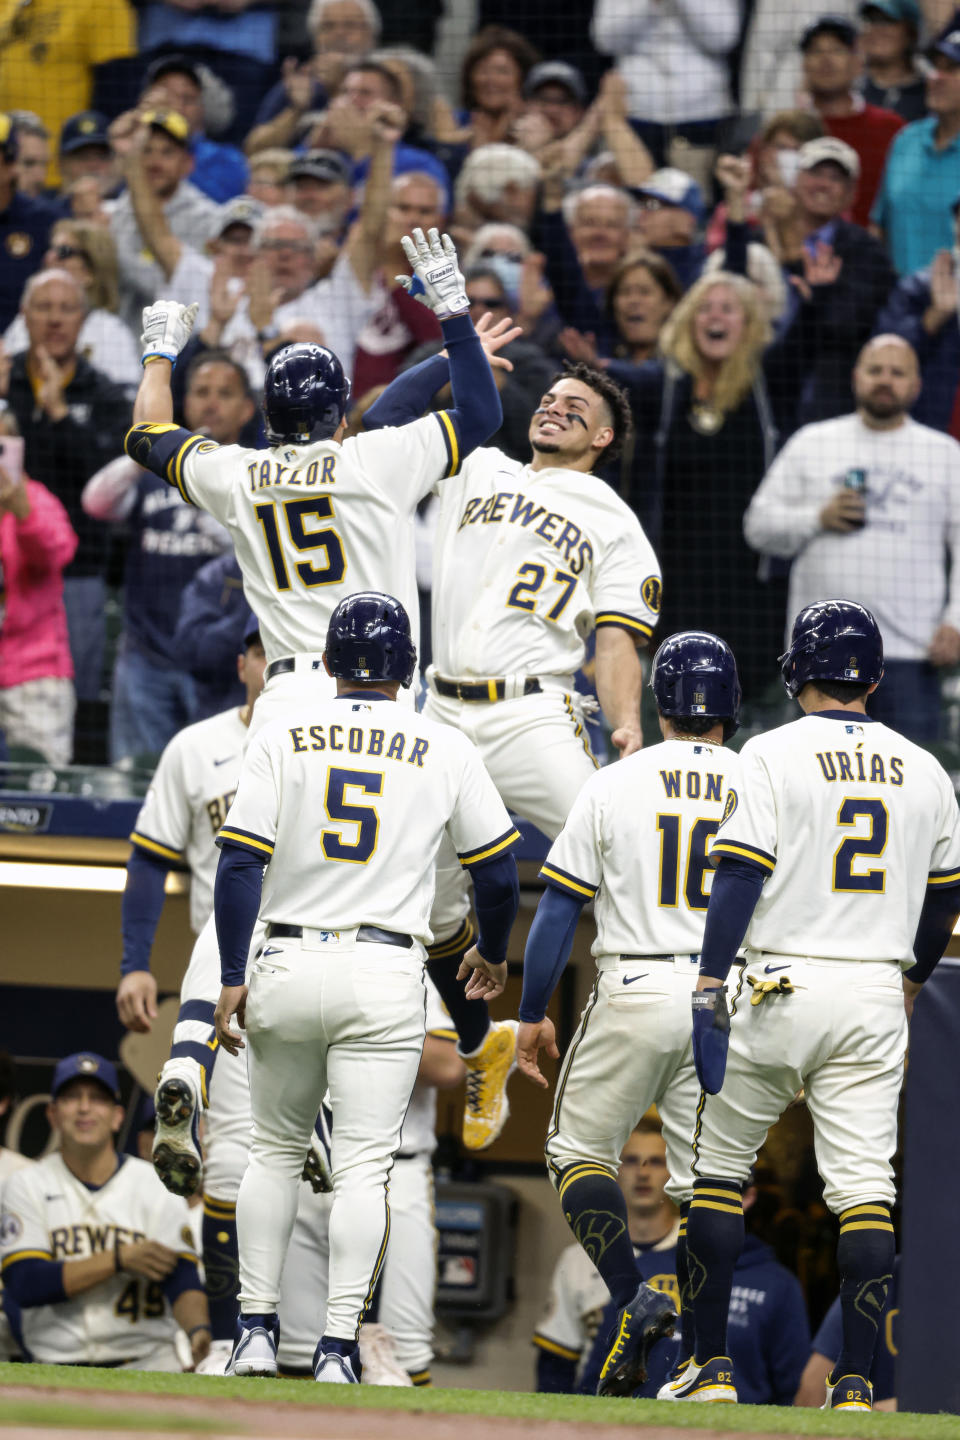 Milwaukee Brewers' Tyrone Taylor(15) gets a high-five from teammate Willy Adames(27) after Taylor's grand slam against the St. Louis Cardinals during the first inning of a baseball game Thursday, Sept. 23, 2021, in Milwaukee. (AP Photo/Jeffrey Phelps)